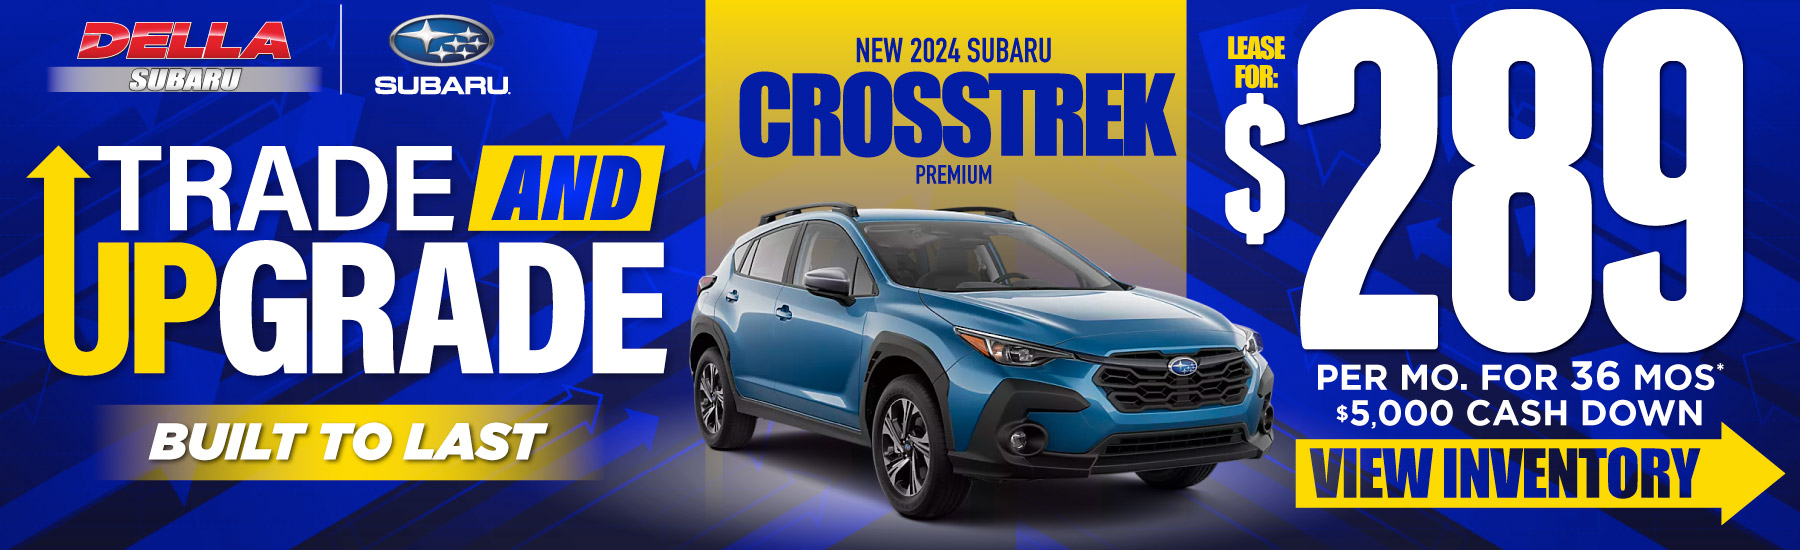 New 2022 Subaru Acsent Limited - Lease for $565 a month - ACT NOW